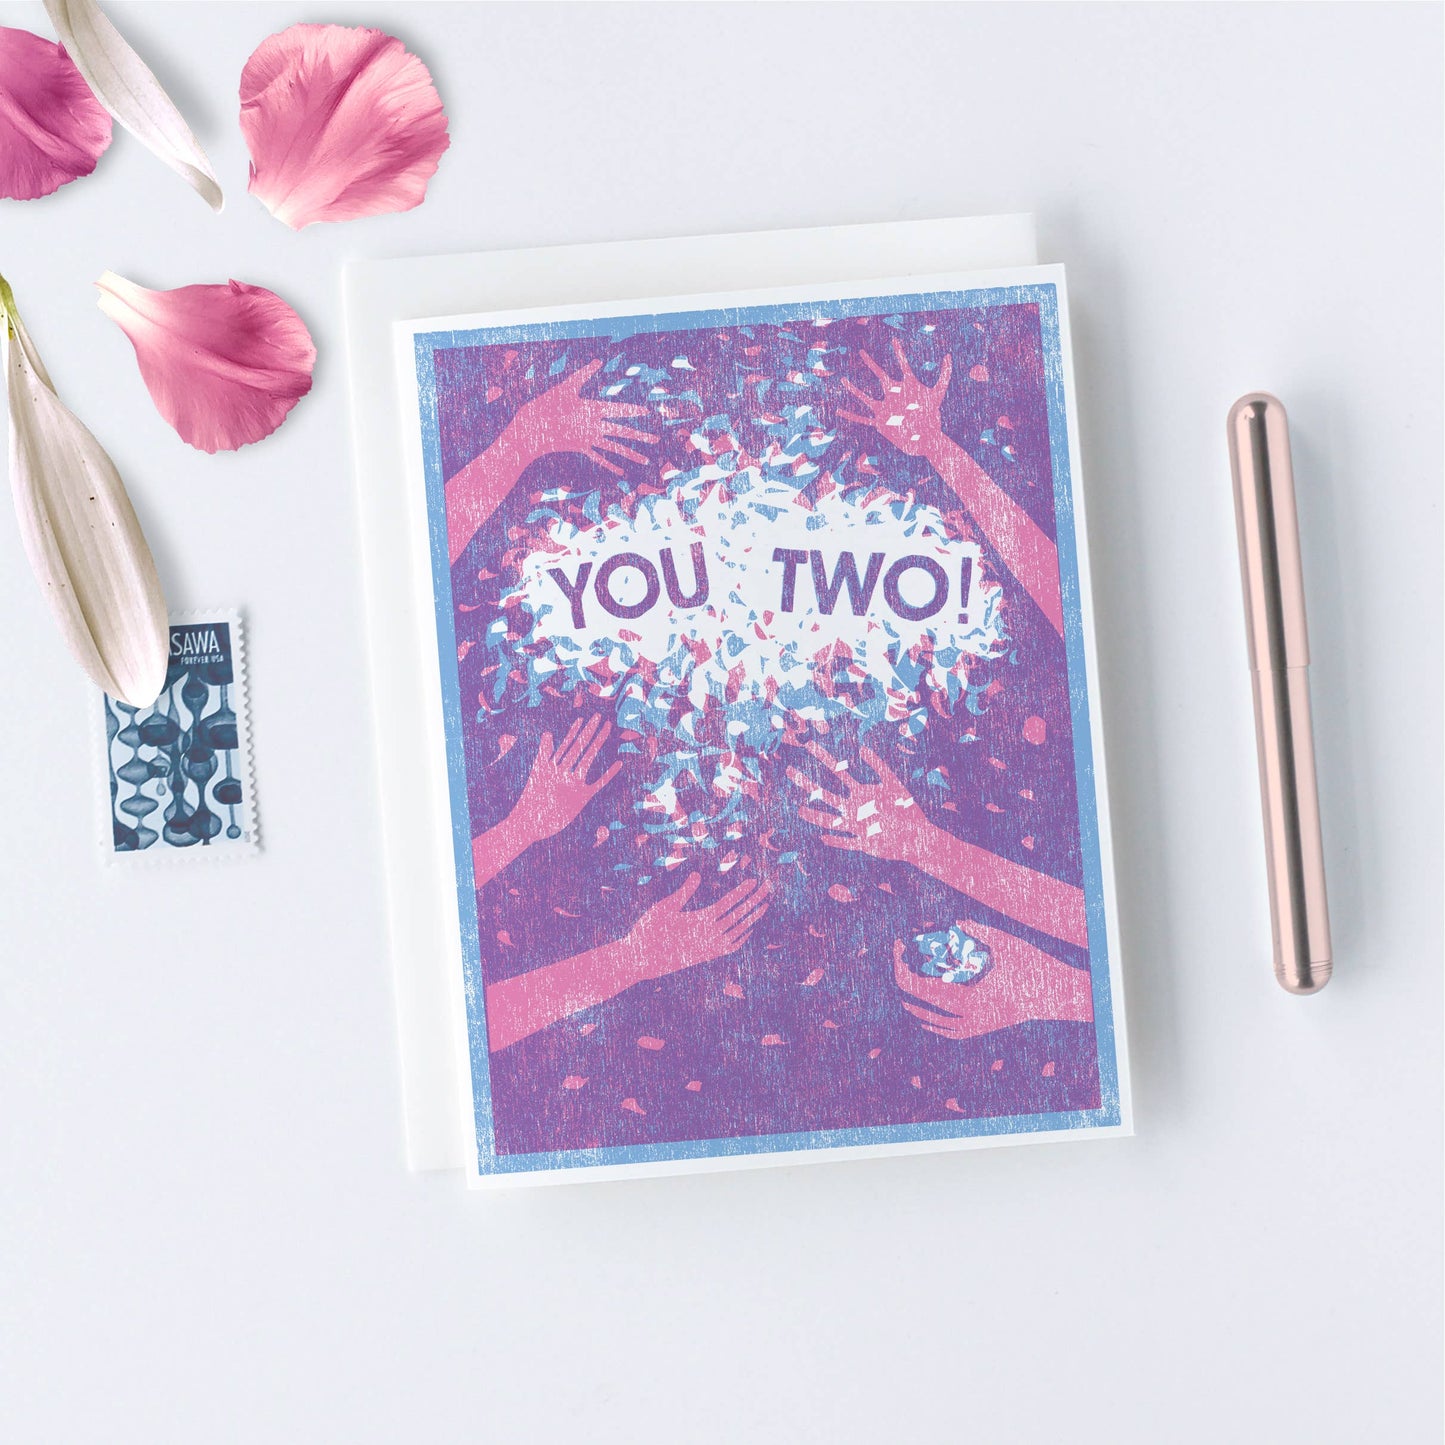 You Two! Card